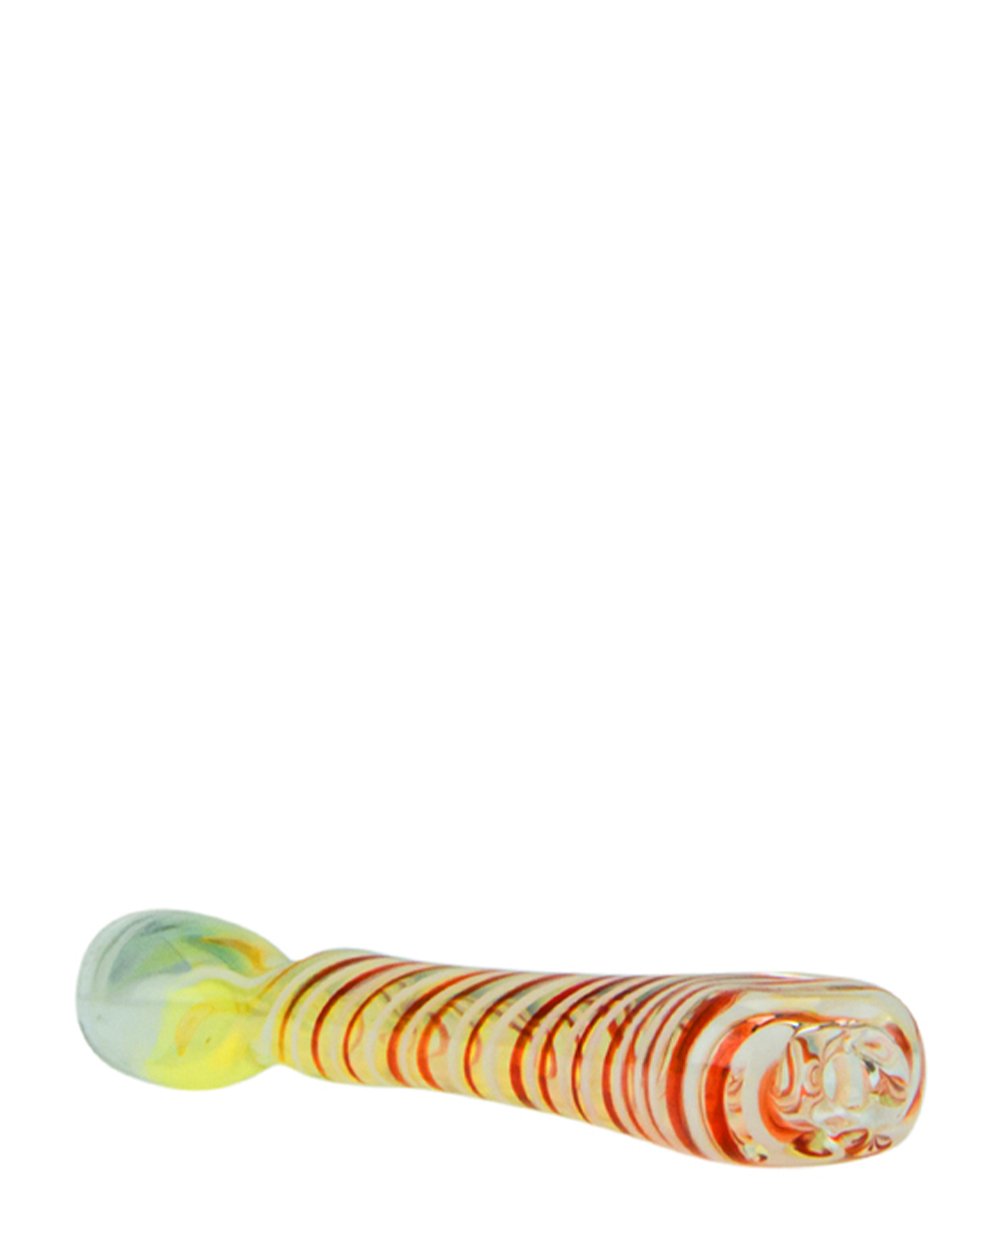 Spiral & Gold Fumed Chillum Hand Pipe | 5in Long - Glass - Assorted - 2